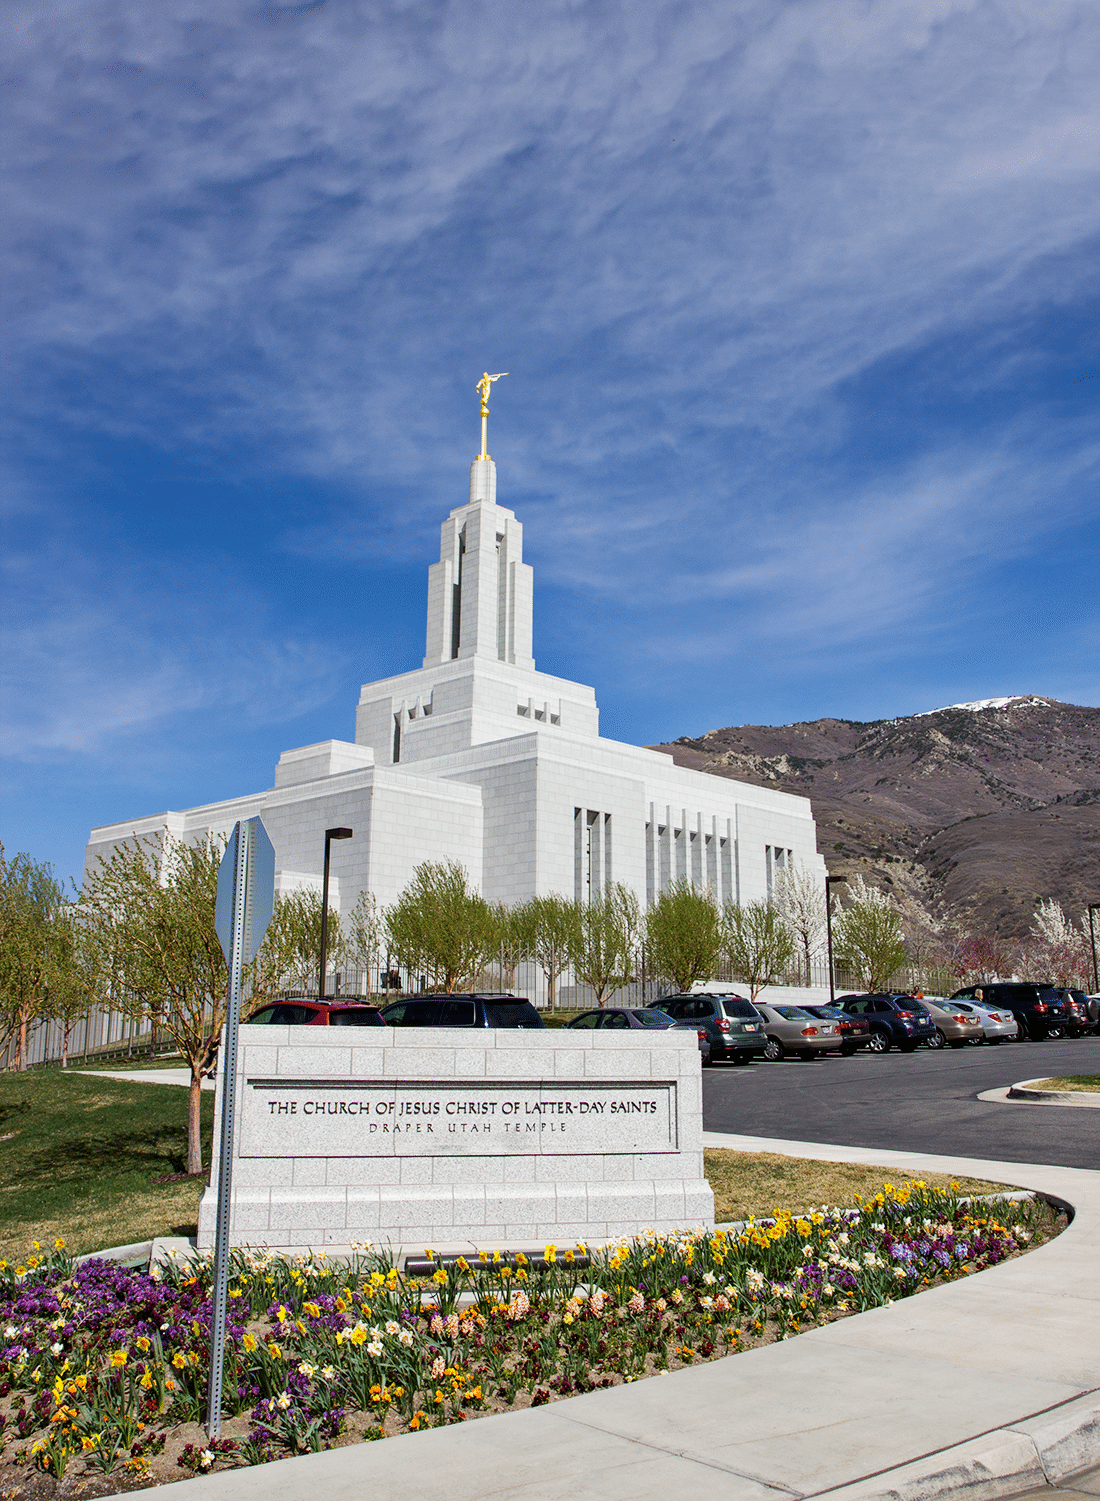 The Draper Utah Temple sign wtih temple in the background. 